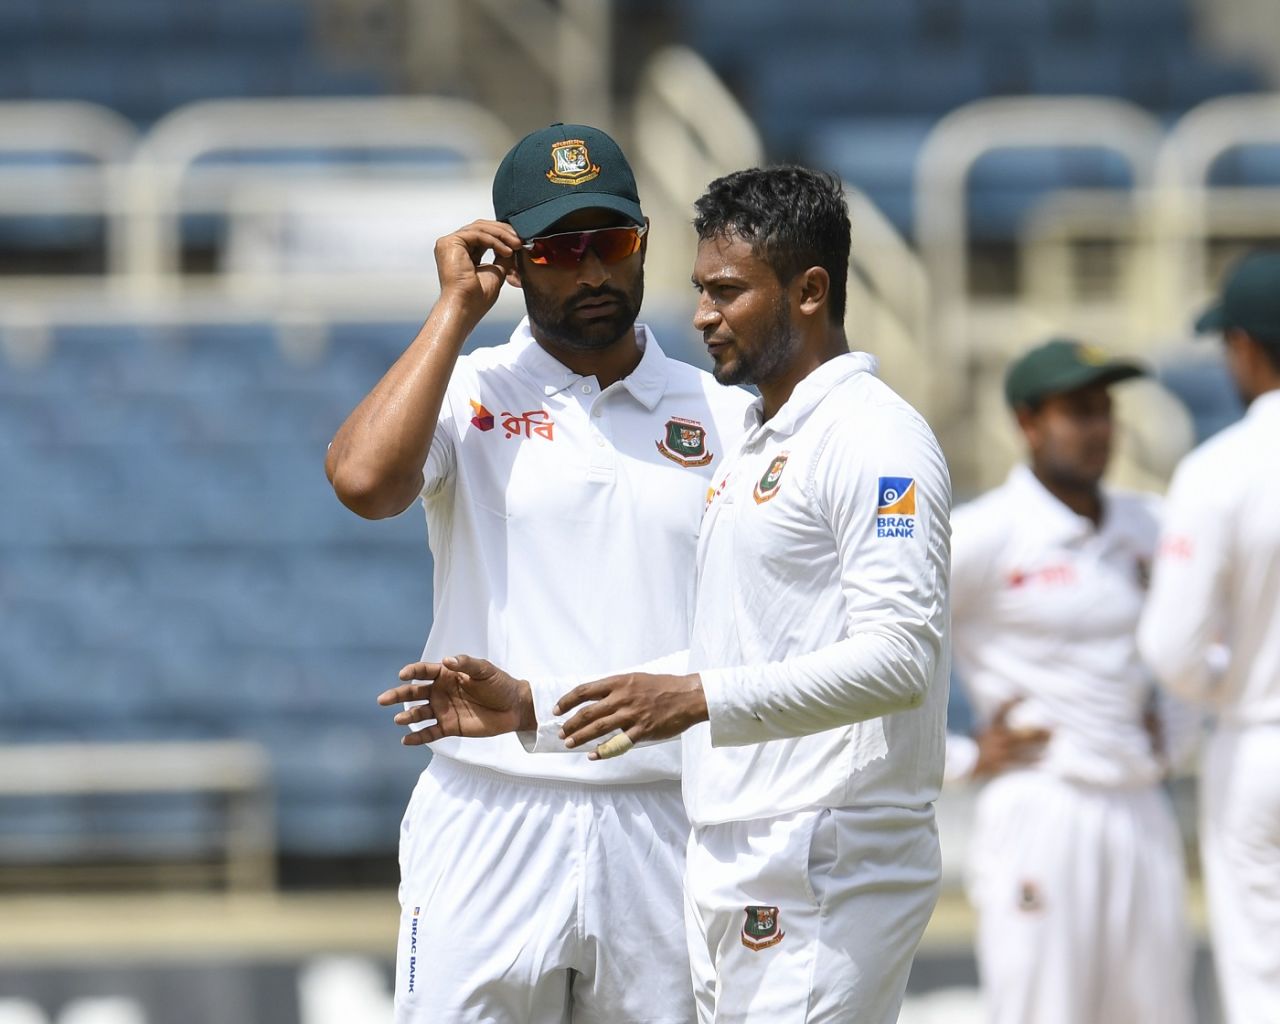 Shakib Al Hasan and Tamim Iqbal have chat in the morning session, West Indies v Bangladesh, 2nd Test, Jamaica, 1st day, July 12, 2018